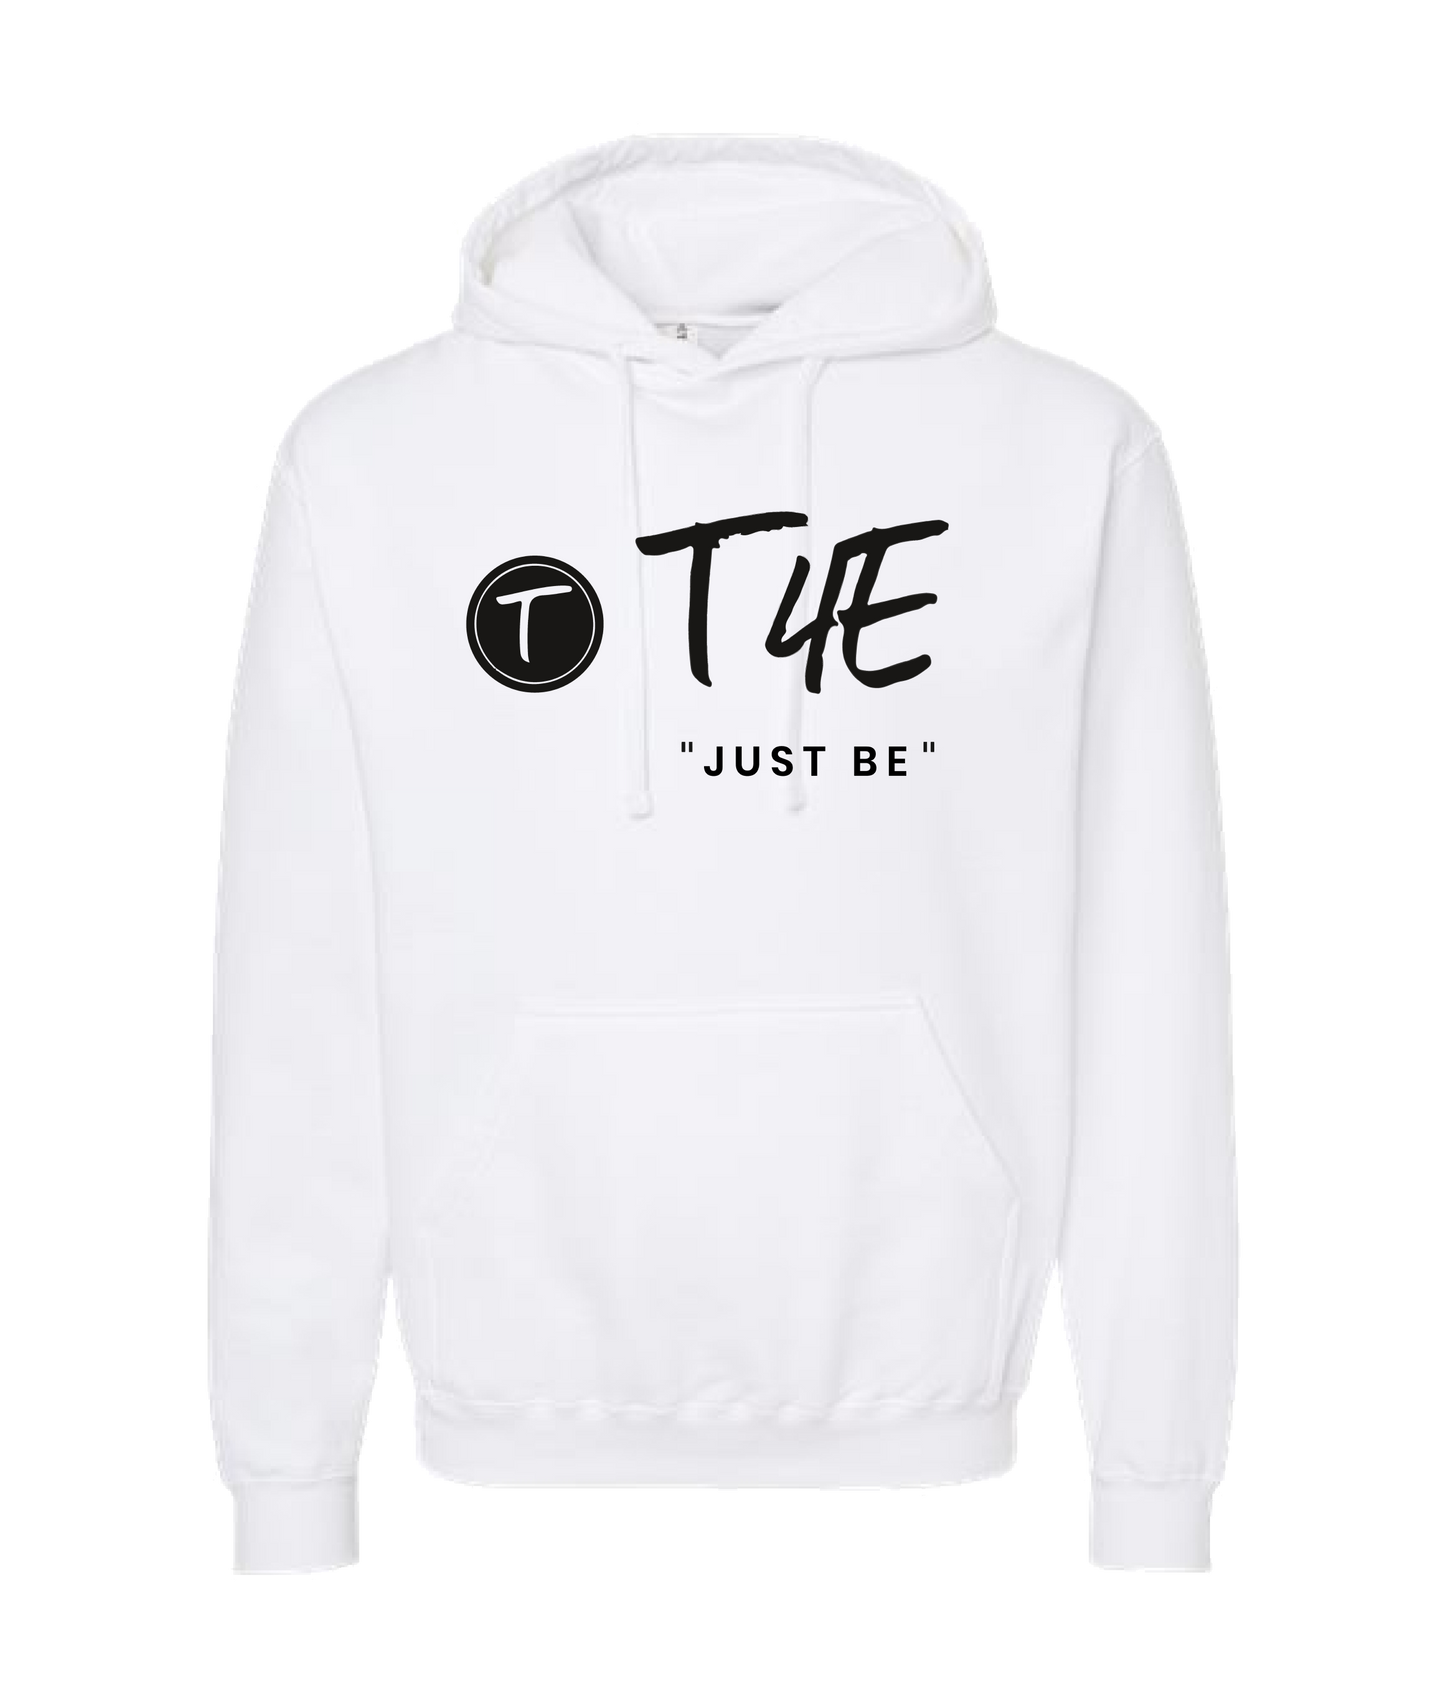 T4E (Trans4ormed Extreme) - JUST BE - White Hoodie